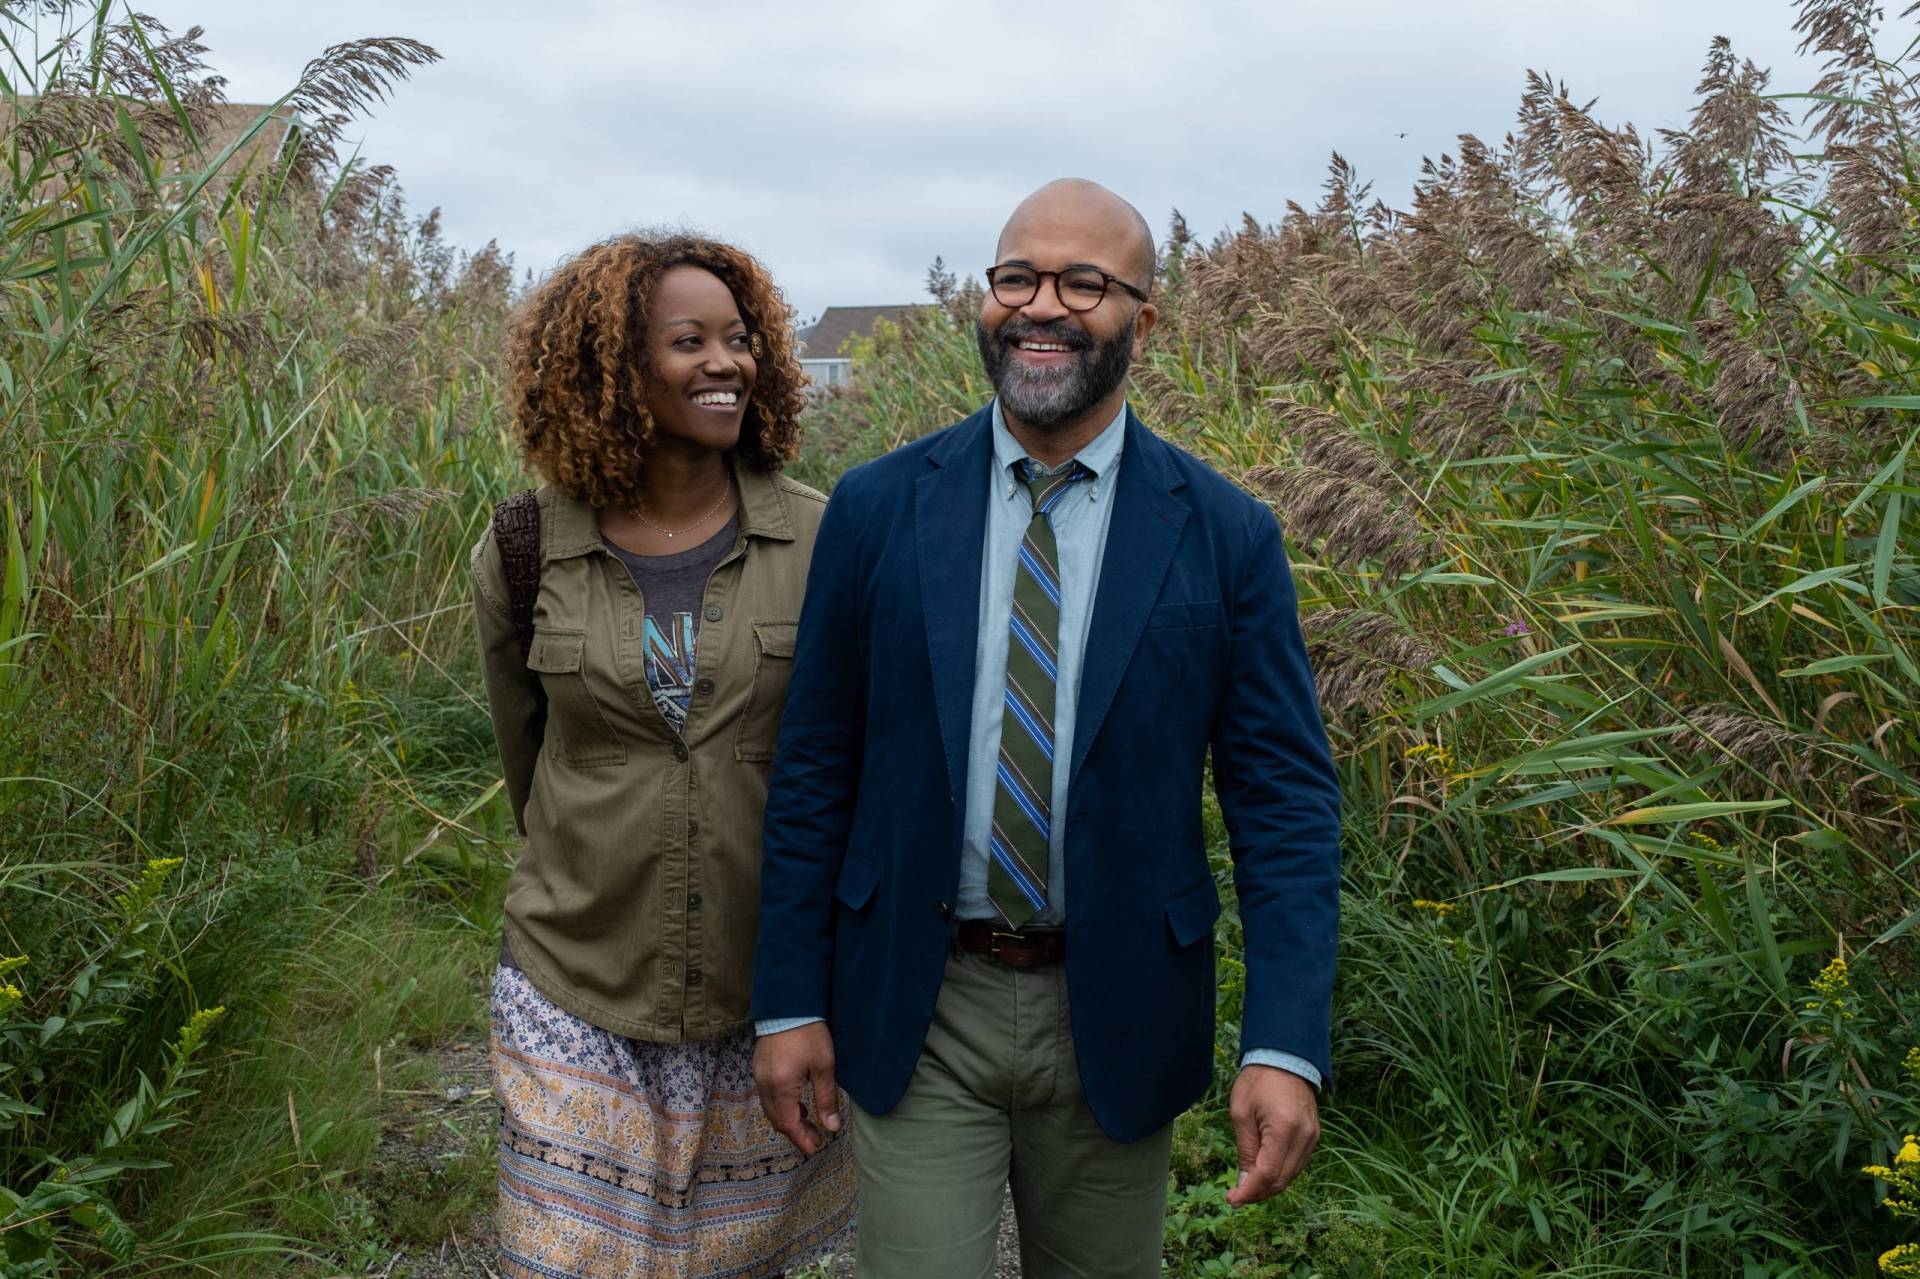 A Black woman and man walk down a grassy path, surrounded on both sides by tall shrubs and plants. They are smiling.